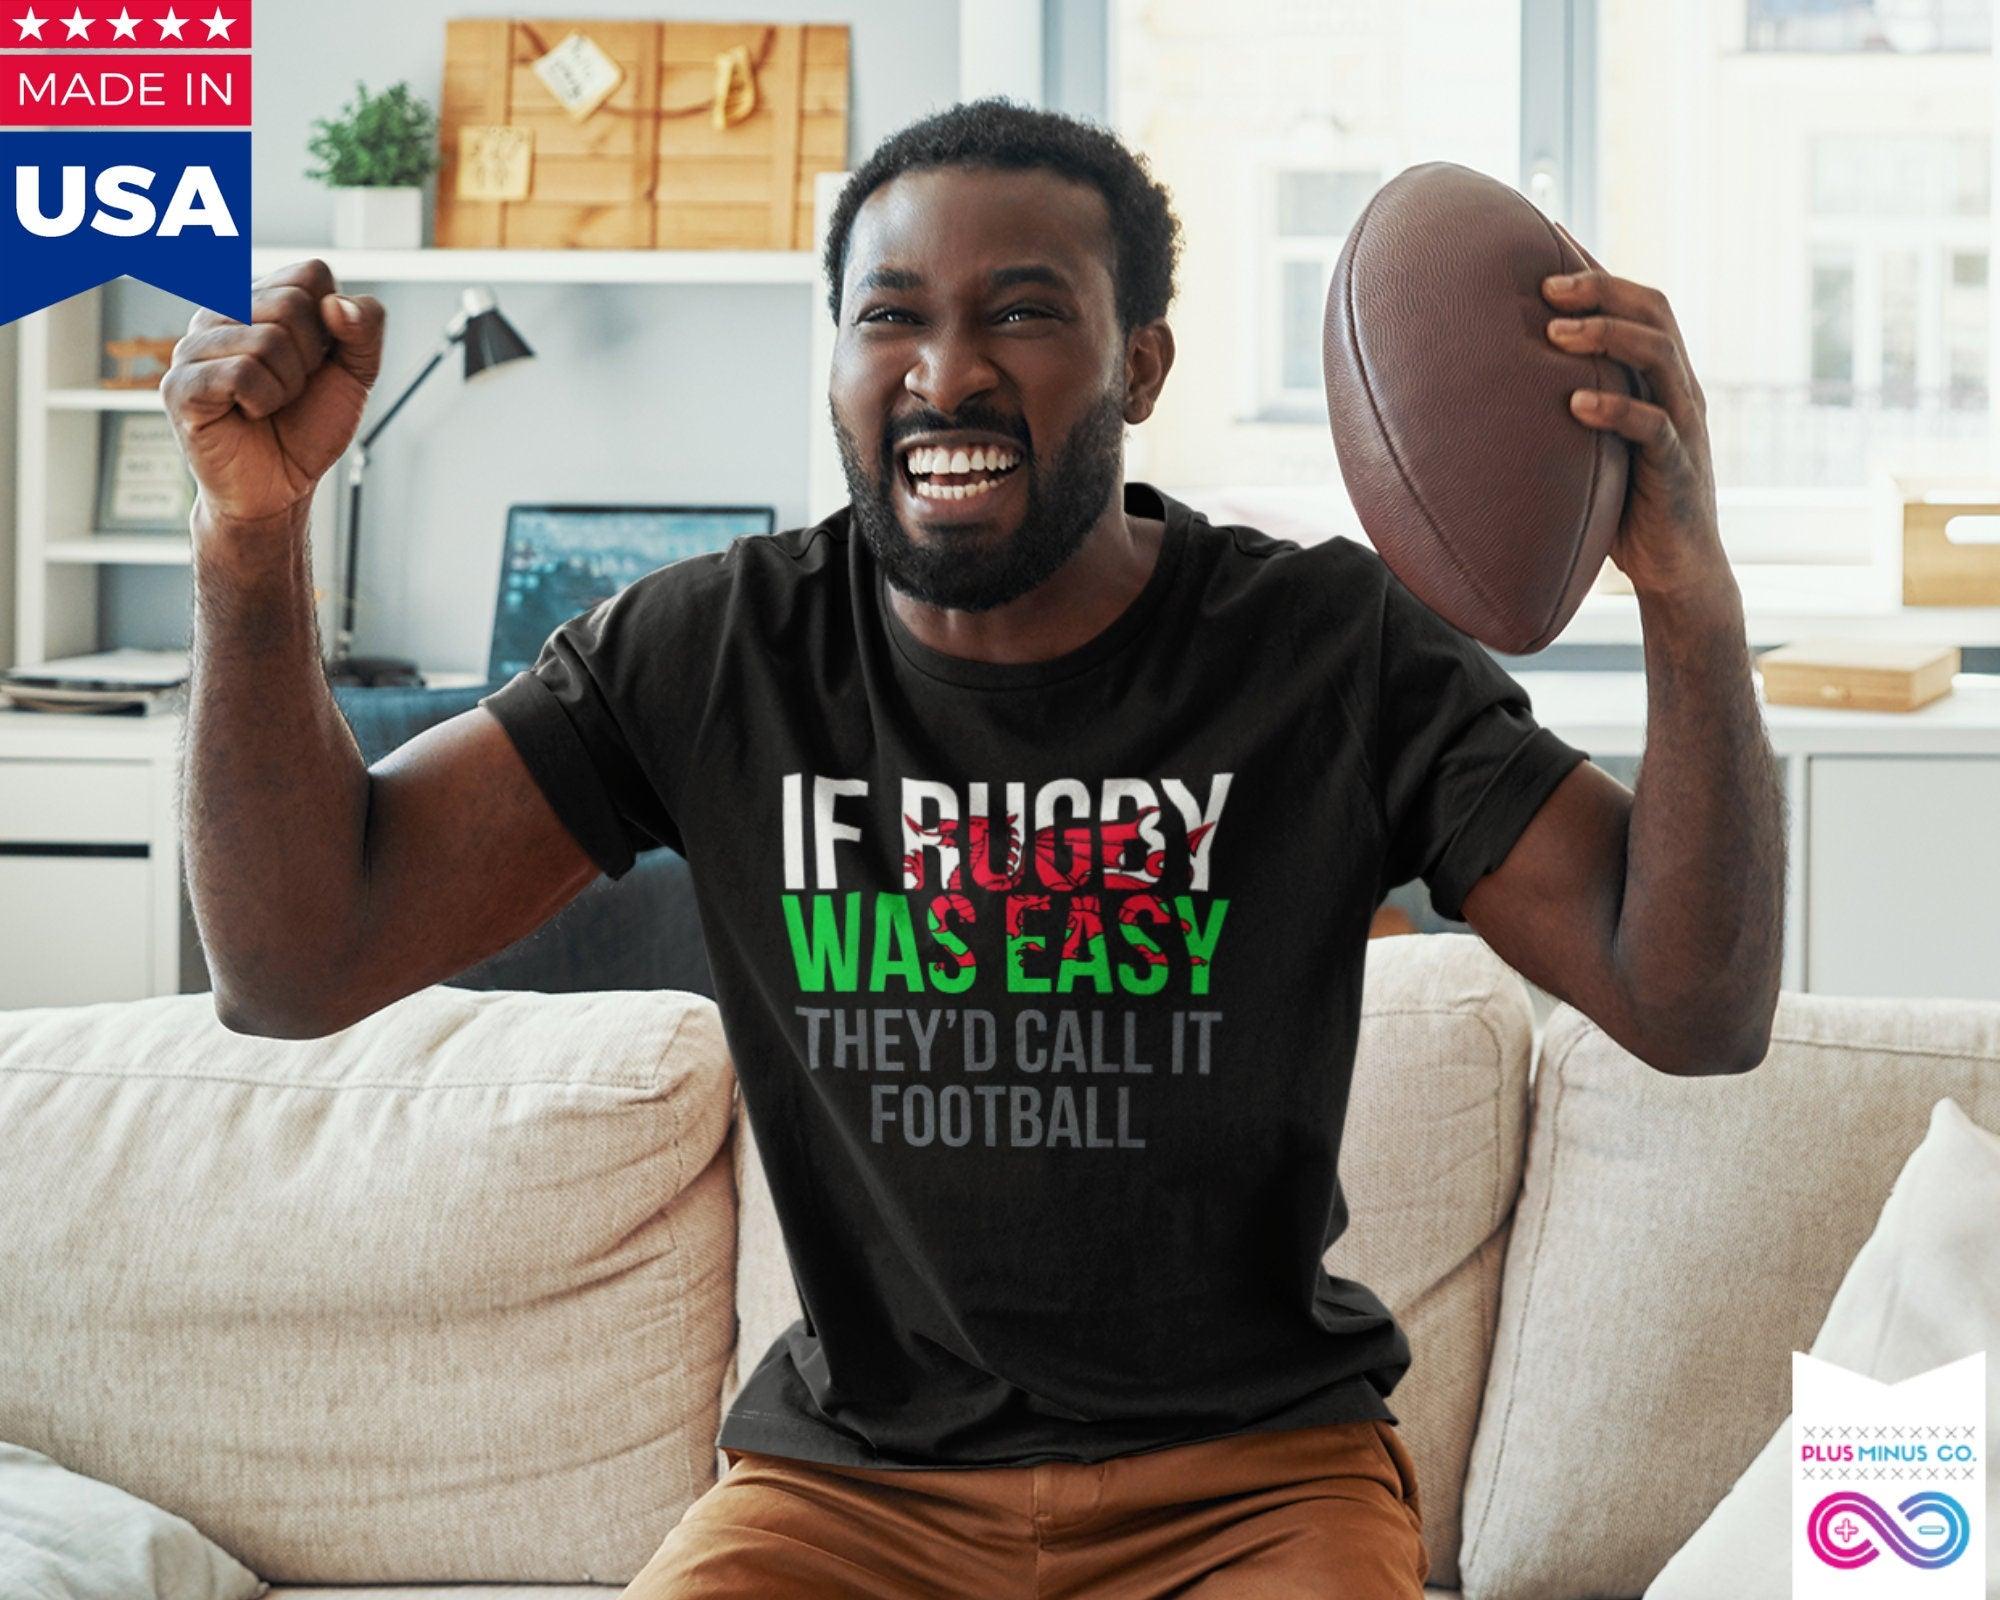 Lustiges walisisches Rugby - Wales Rugby T-Shirt, Rugby-Fan | Rugby-Geschenke | Rugby-Spieler-Shirt | Rugby-Team, Rugby-Mutter, Rugby-Spieler, verrückter Fan, lustiges Wales Rugby, lustiges walisisches Rugby, Rugby-Trainer, Rugby-Mutter, Rugby-Spieler, Rugby-Spieler-Shirt, Rugby-Team-T-Shirt, Rugby-Erntedankfest, T-Shirt, T-Shirts, britischer Rugby-Fan, Wales-Fan , Wales Rugby, Wales WELSH Rugby, Welsh Rugby - plusminusco.com